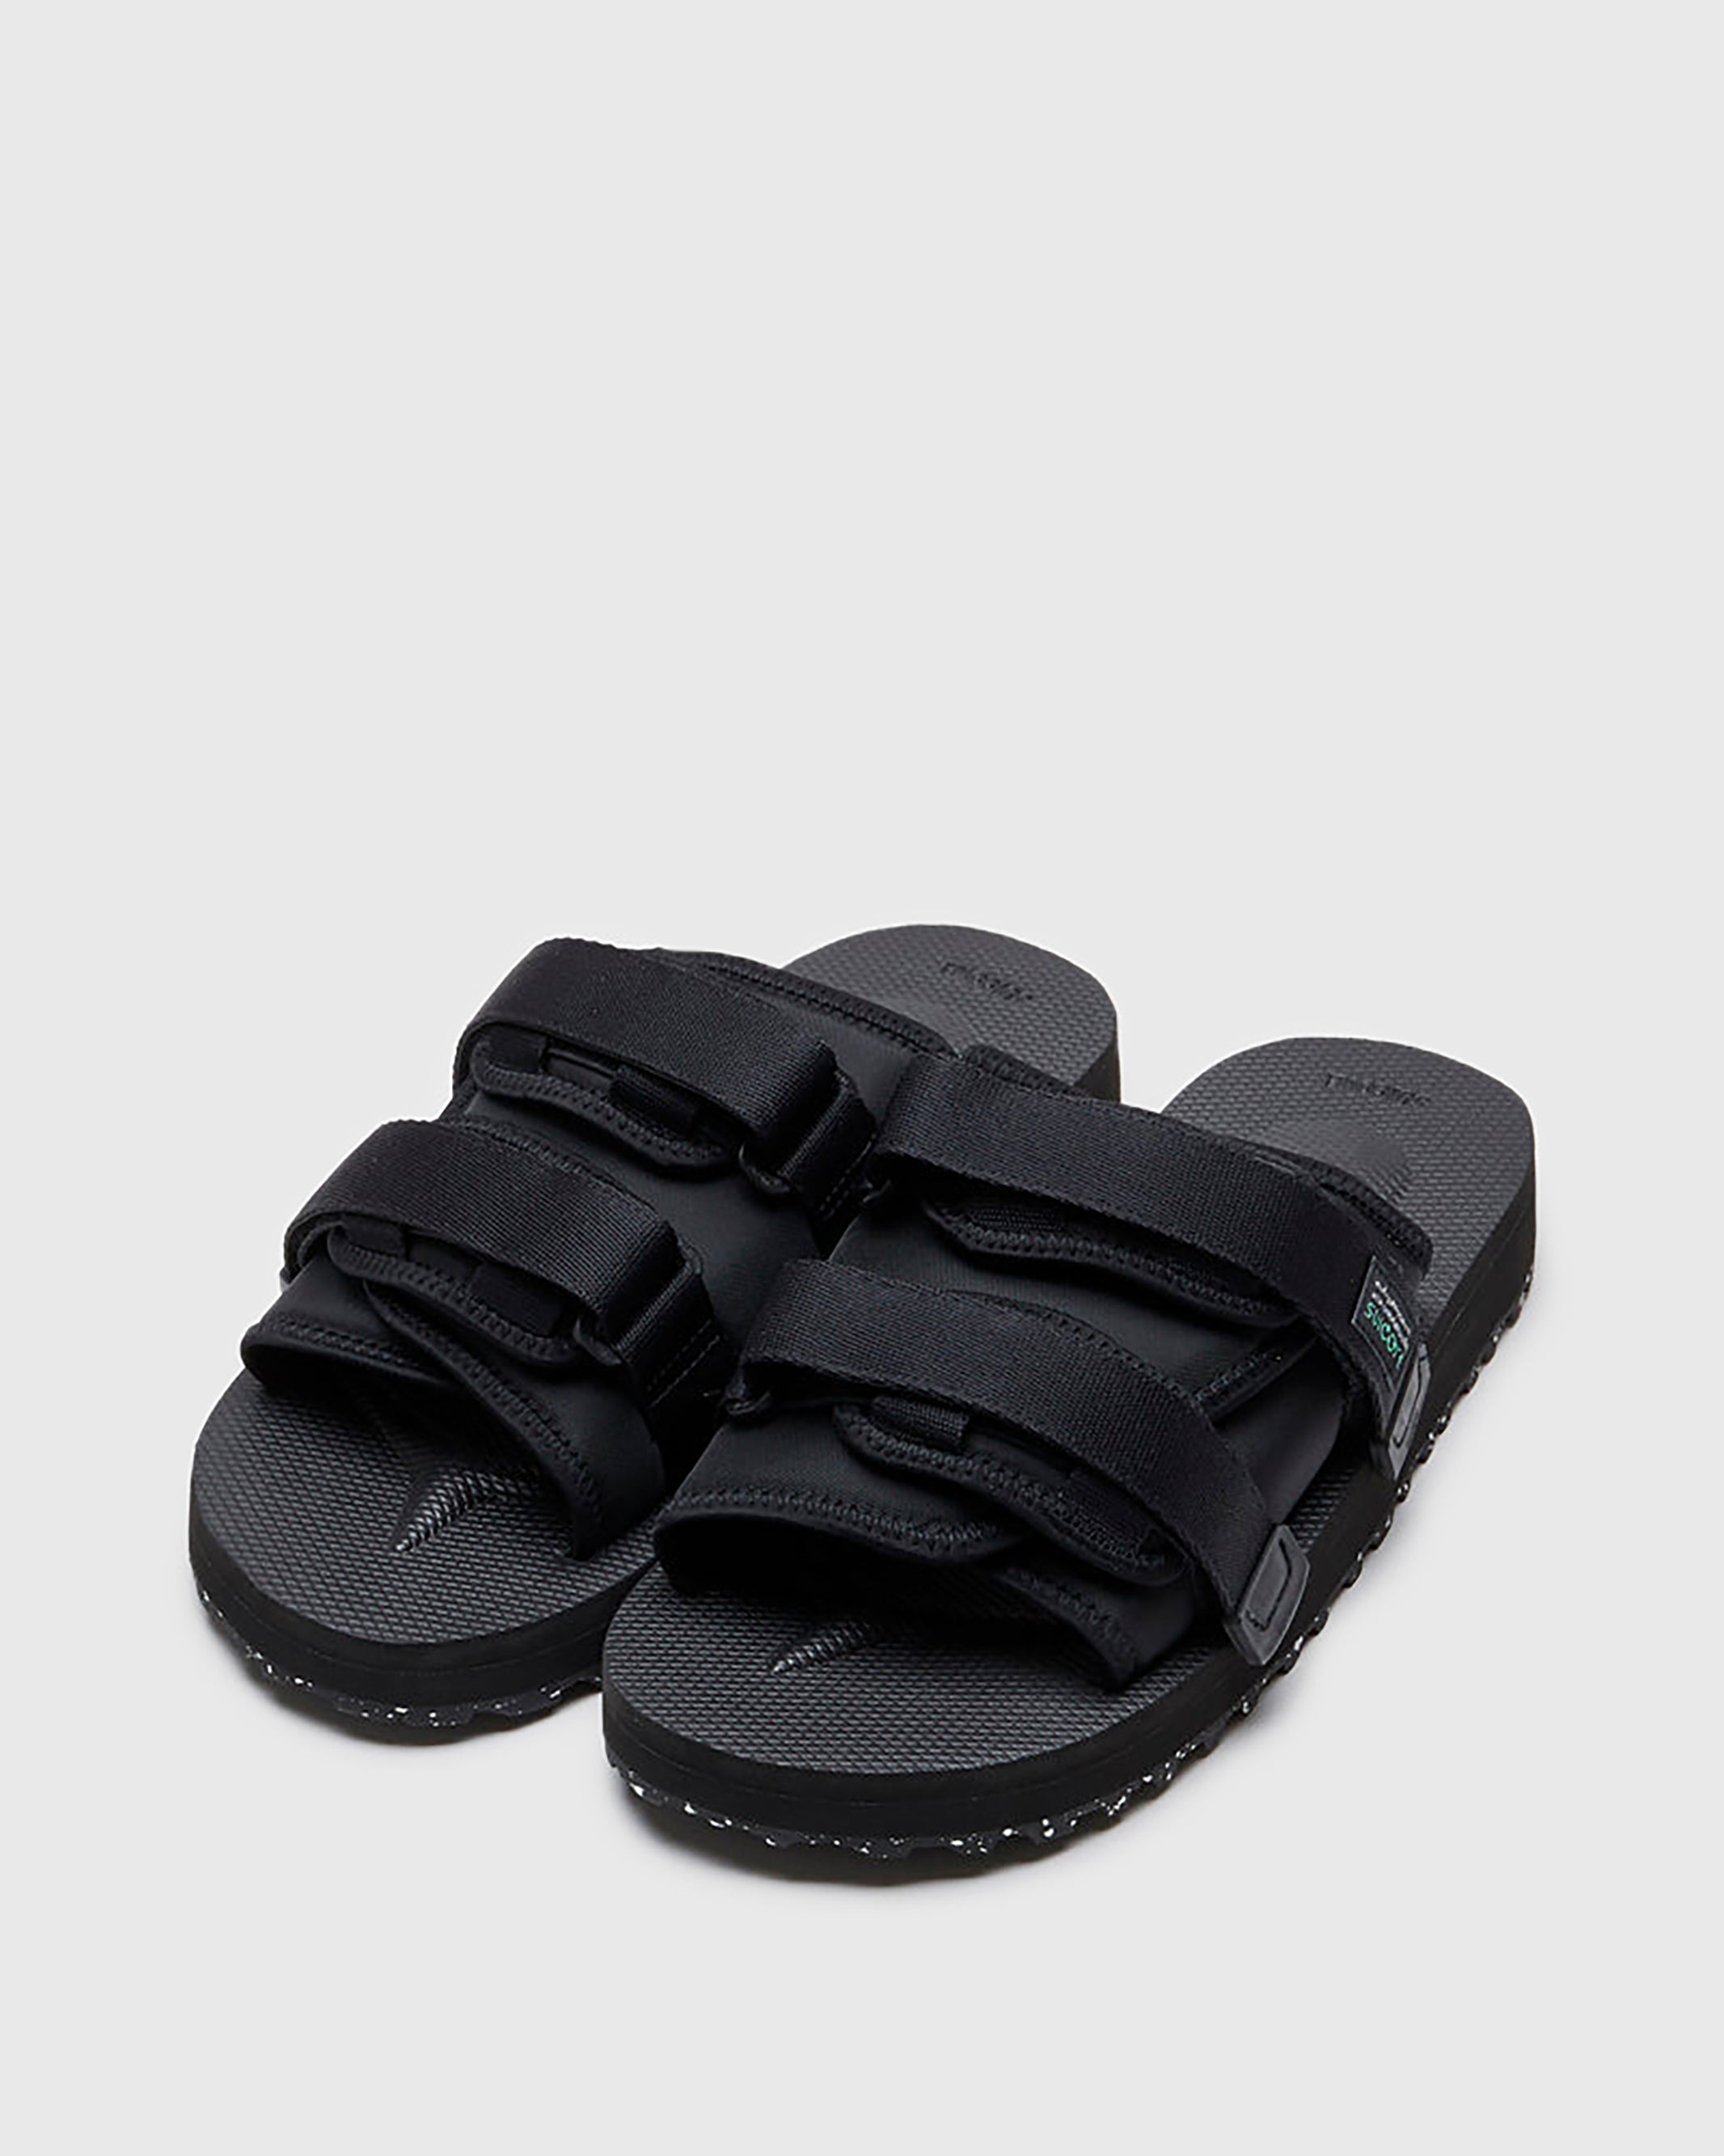 SUICOKE MOTO-Cab-ECO in Black OG-056CAB-ECO | Shop from eightywingold an official brand partner for SUICOKE Canada and US.